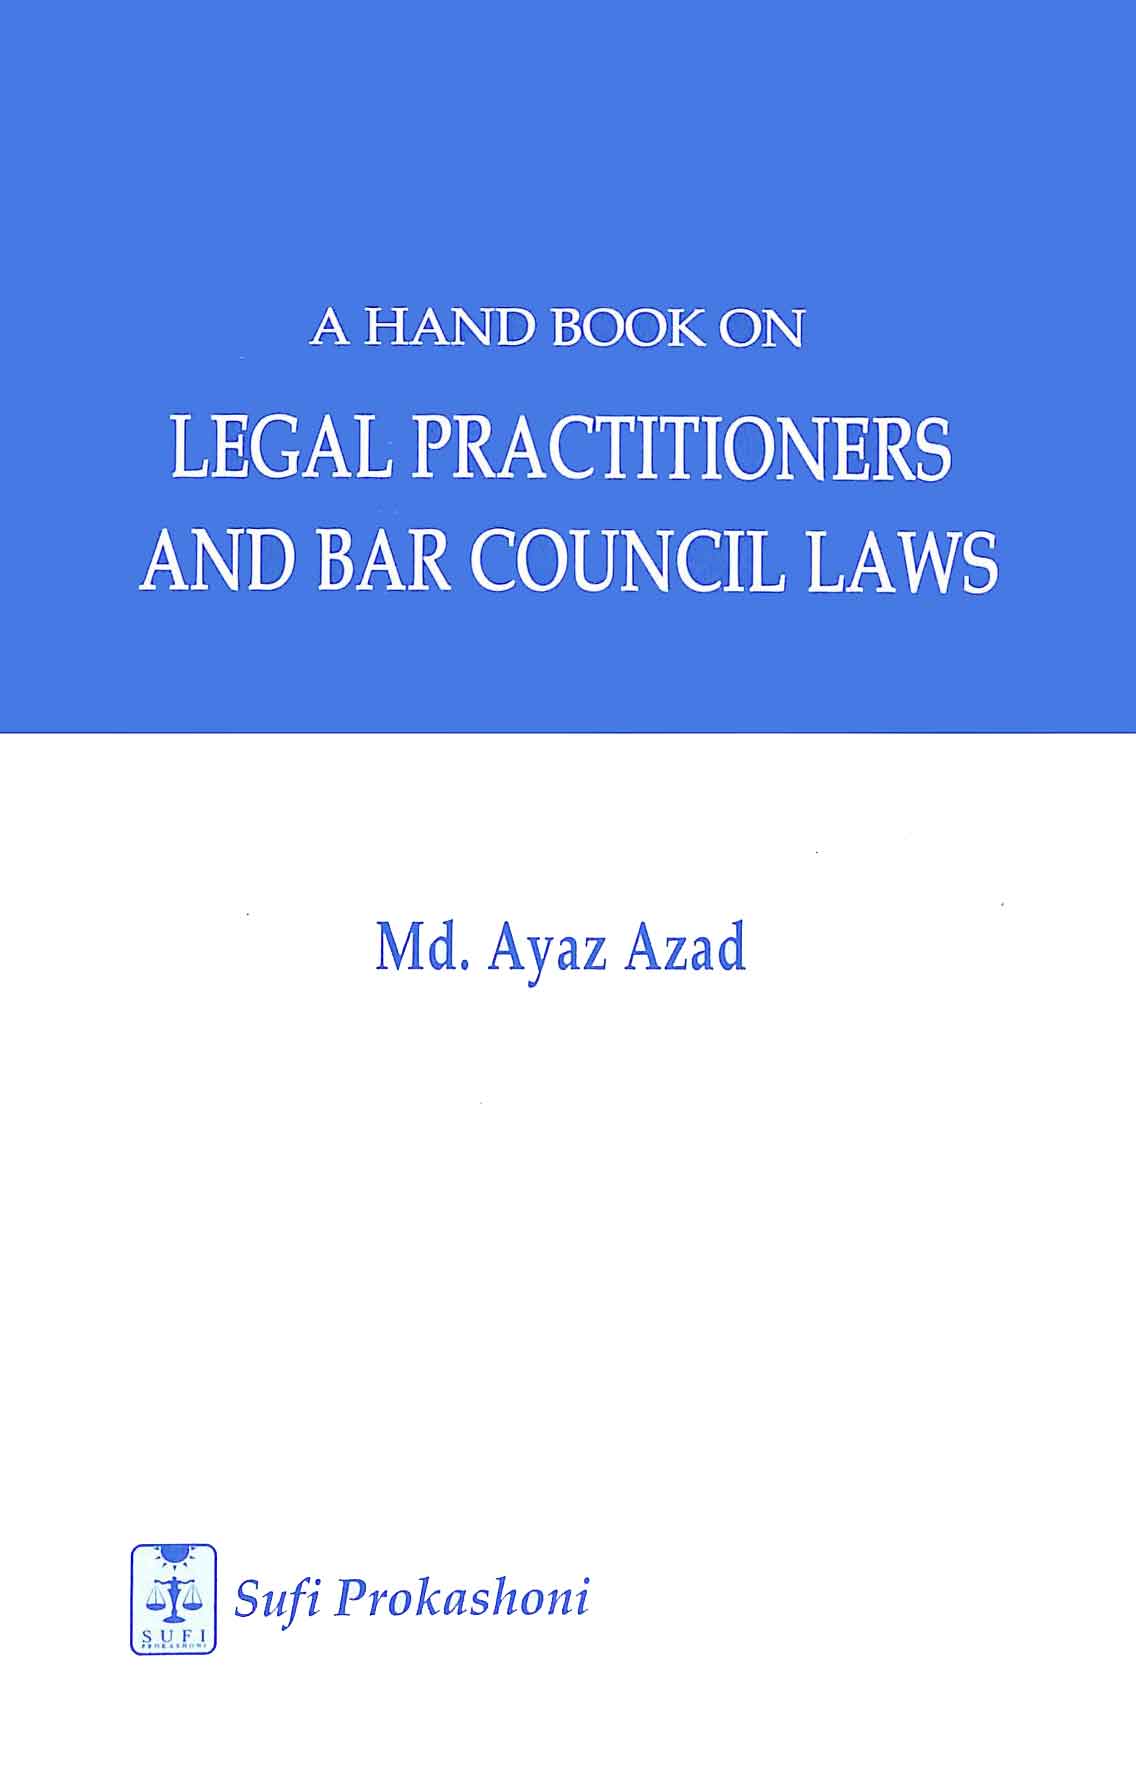 A HANDBOOK ON LEGAL PRACTITIONERS AND BAR COUNCIL LAWS